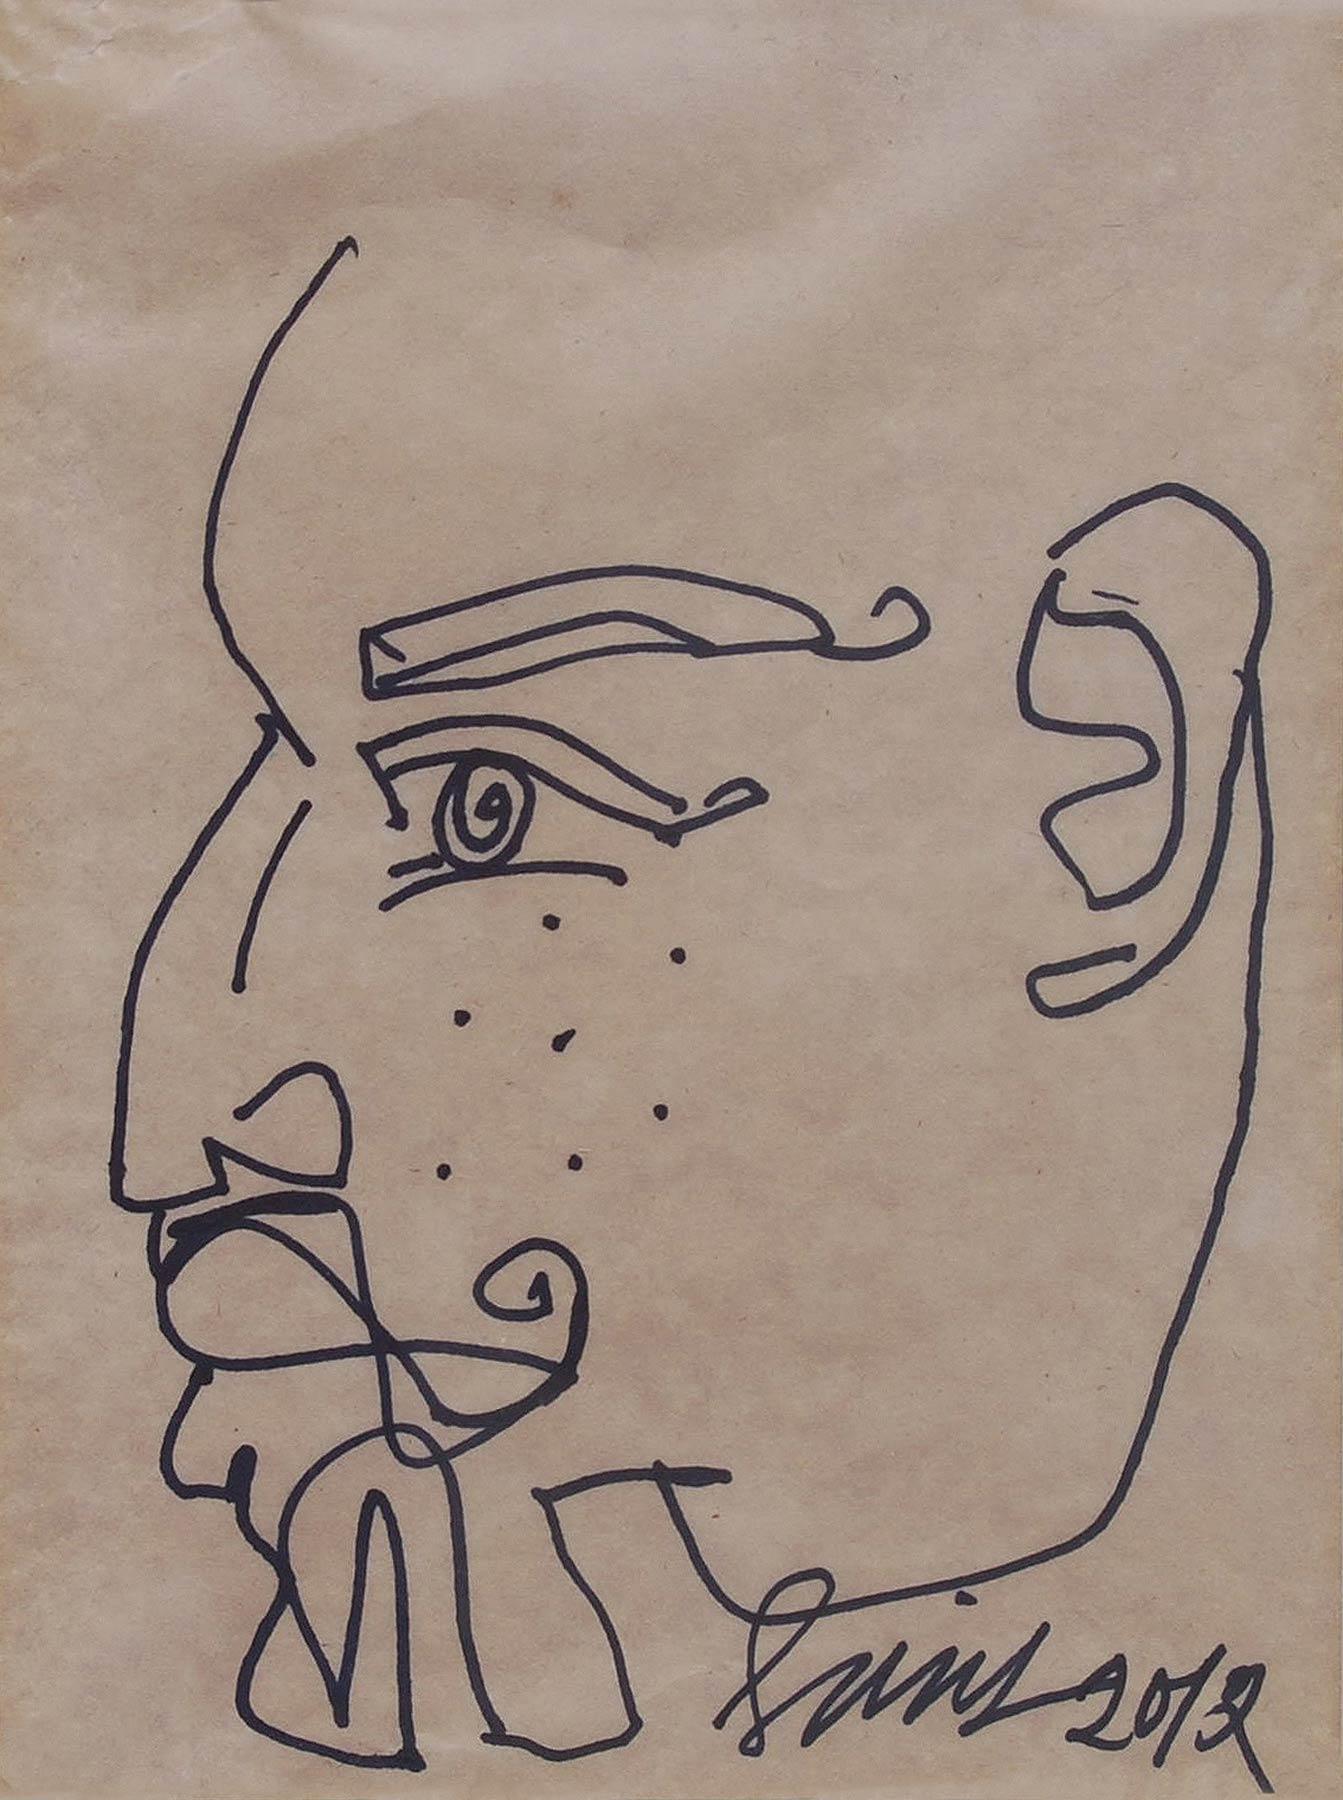 Face of Bearded Men, Pen and Ink on Paper by Modern Indian Artist "In Stock"